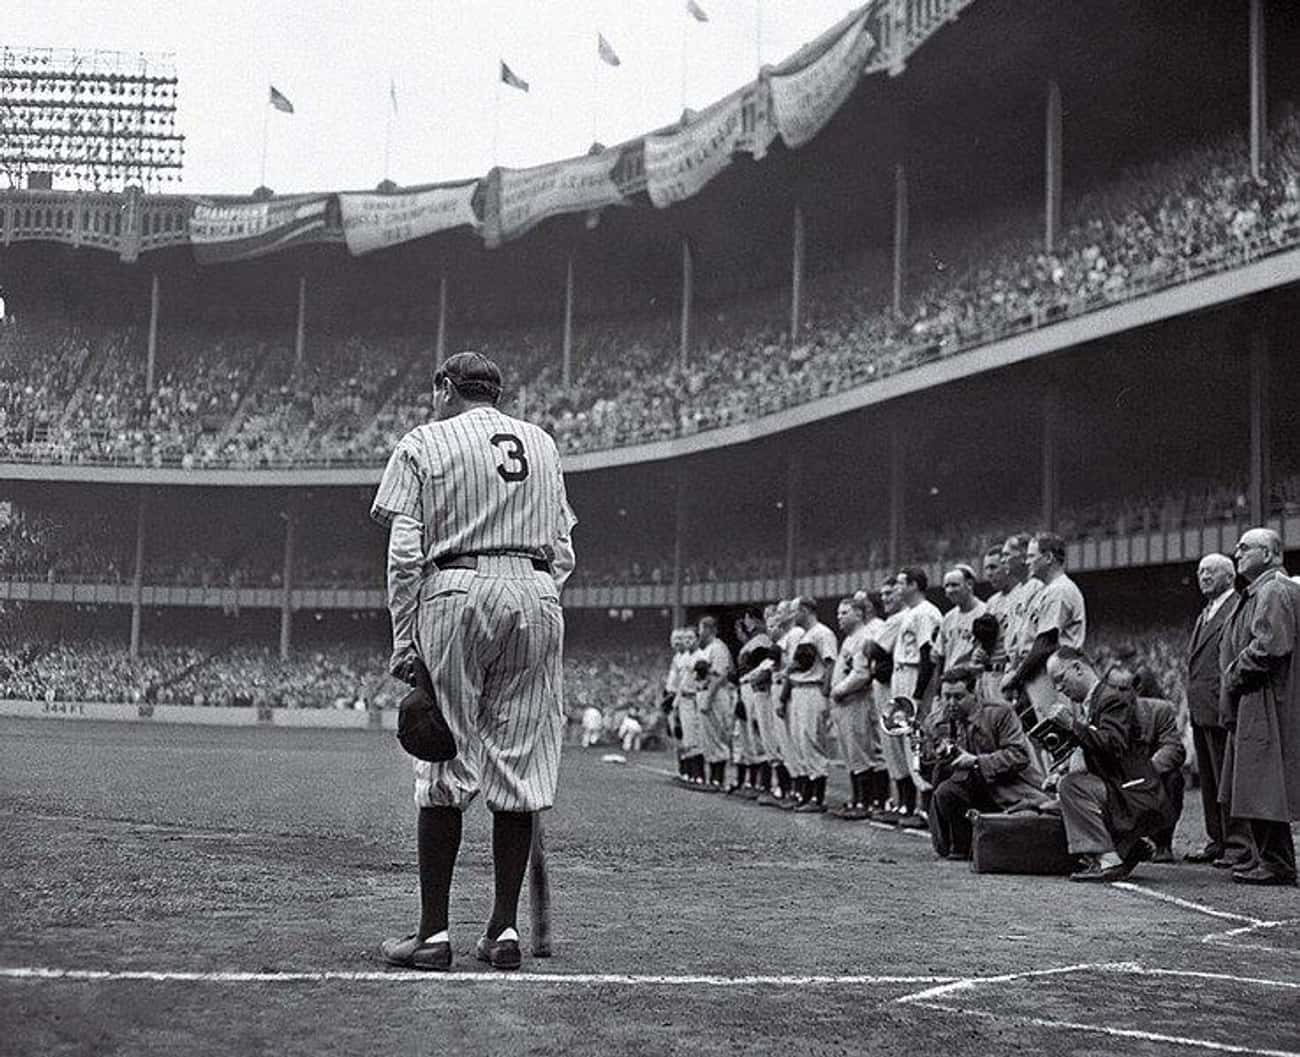 1949: 'Babe Ruth Bows Out'